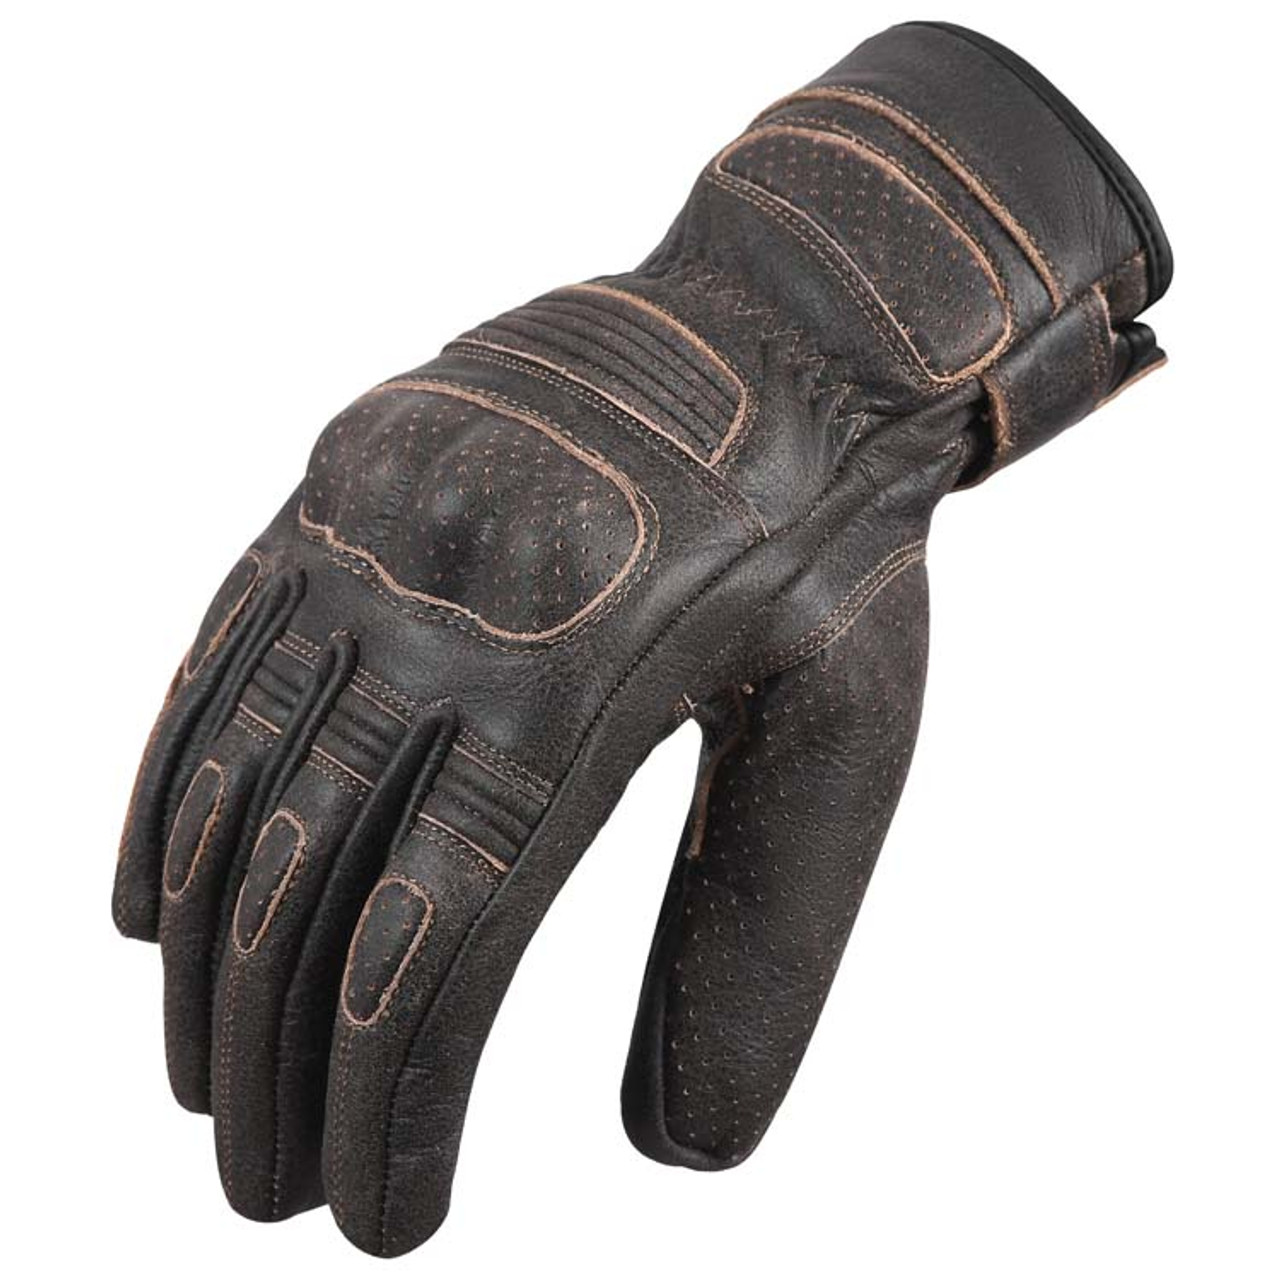 Spider Vintage Style Cruiser Riding Brown leather motorcycle glove